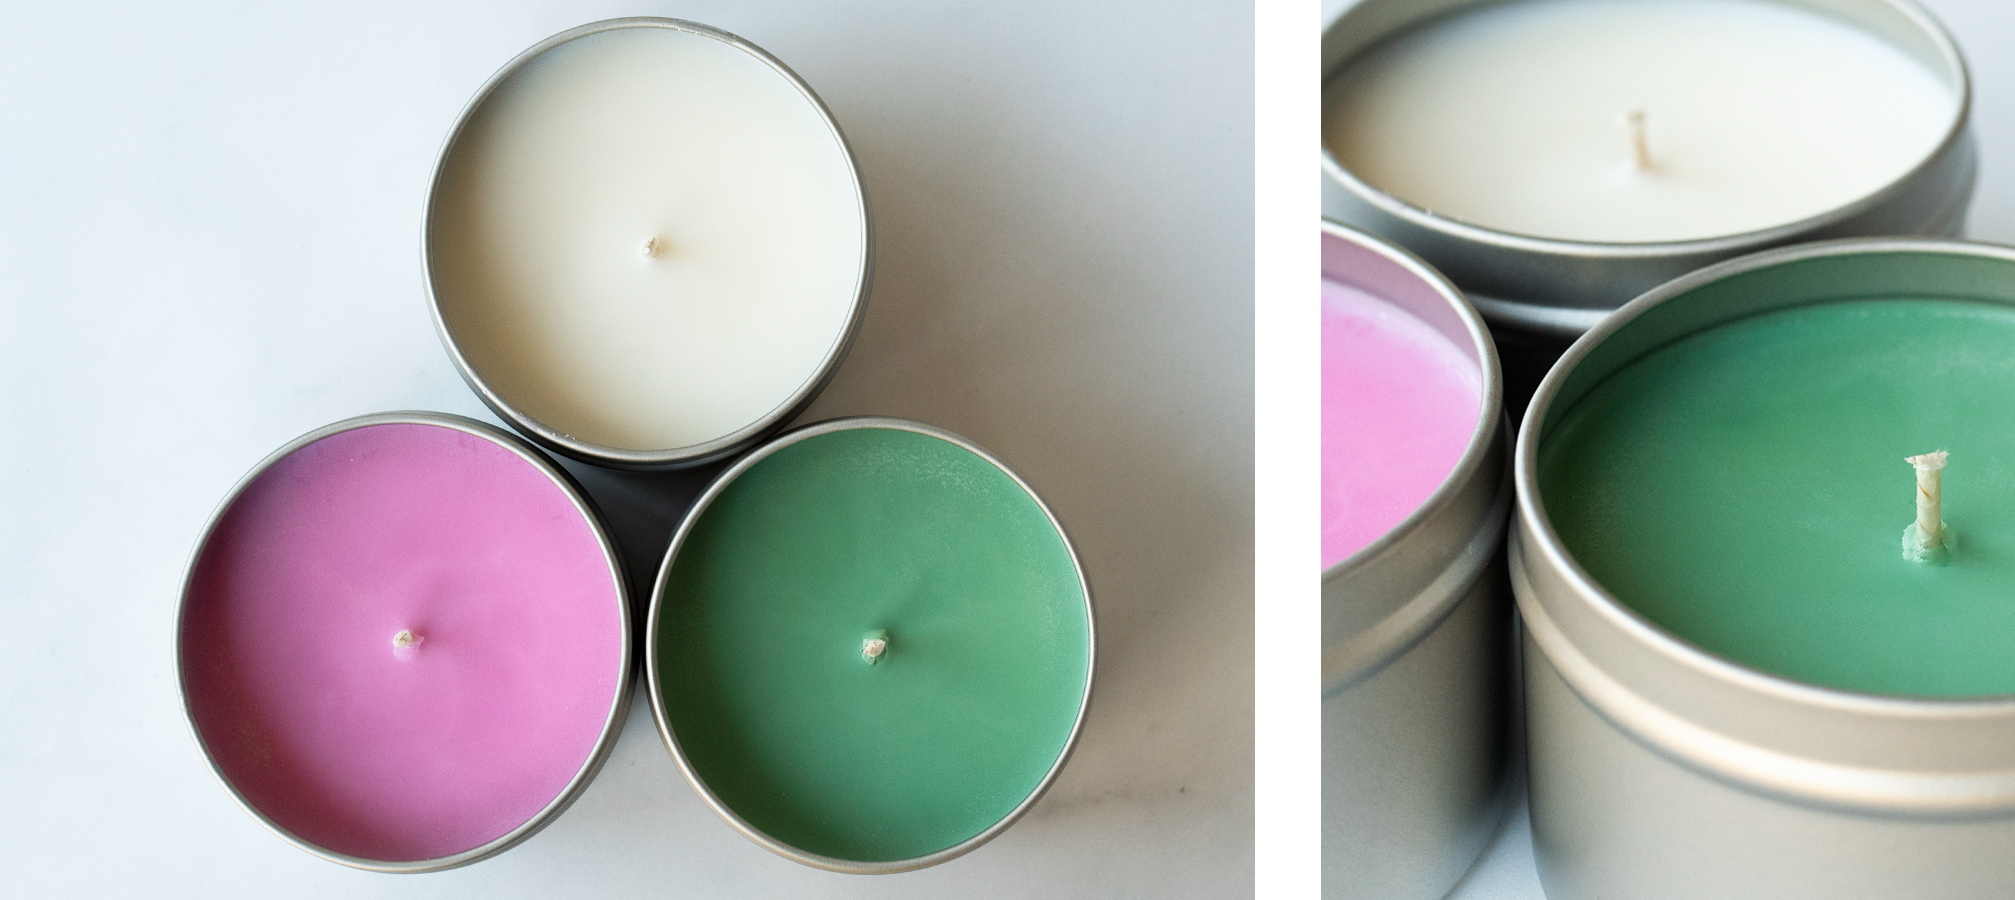 A trio of soy candle tins in holiday colors.